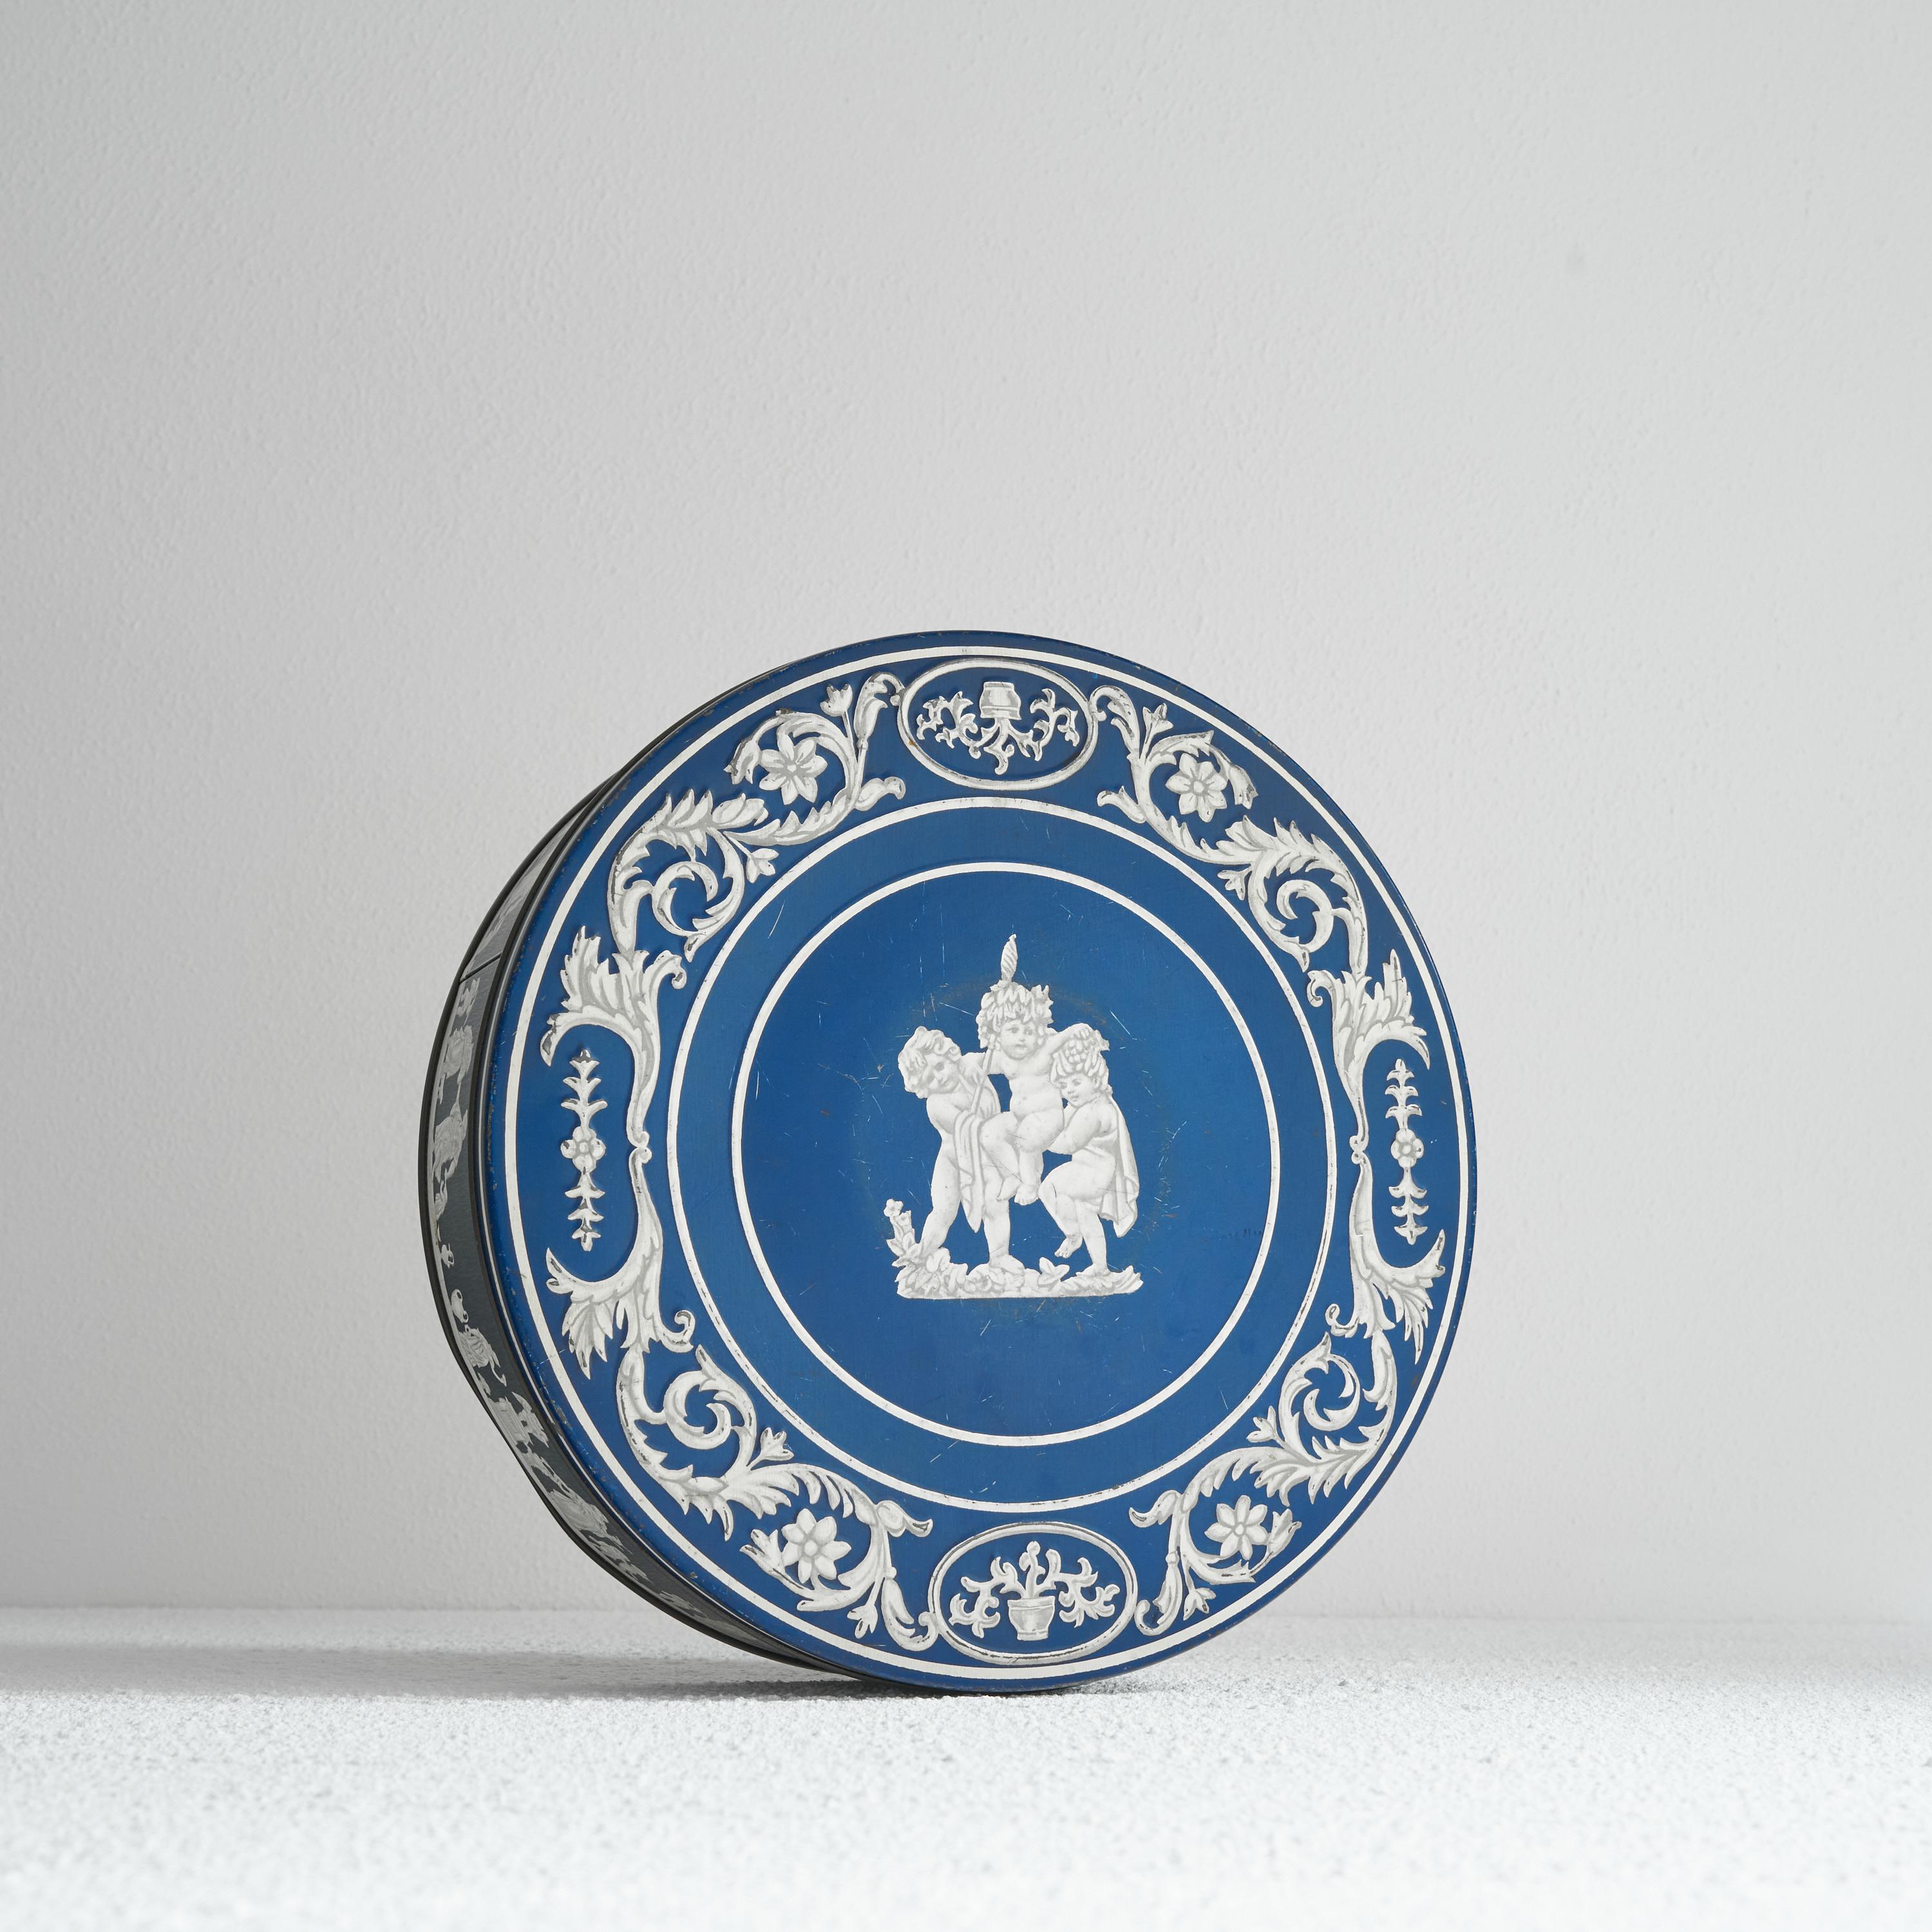 Huntley Boorne & Stevens Mid Century ‘Wedgwood Jasperware’ Biscuit Tin, England, mid 20th century.

This is a very decorative biscuit tin by Huntley Boorne & Stevens, one of the premier makers of tins in England in the previous decades. This very